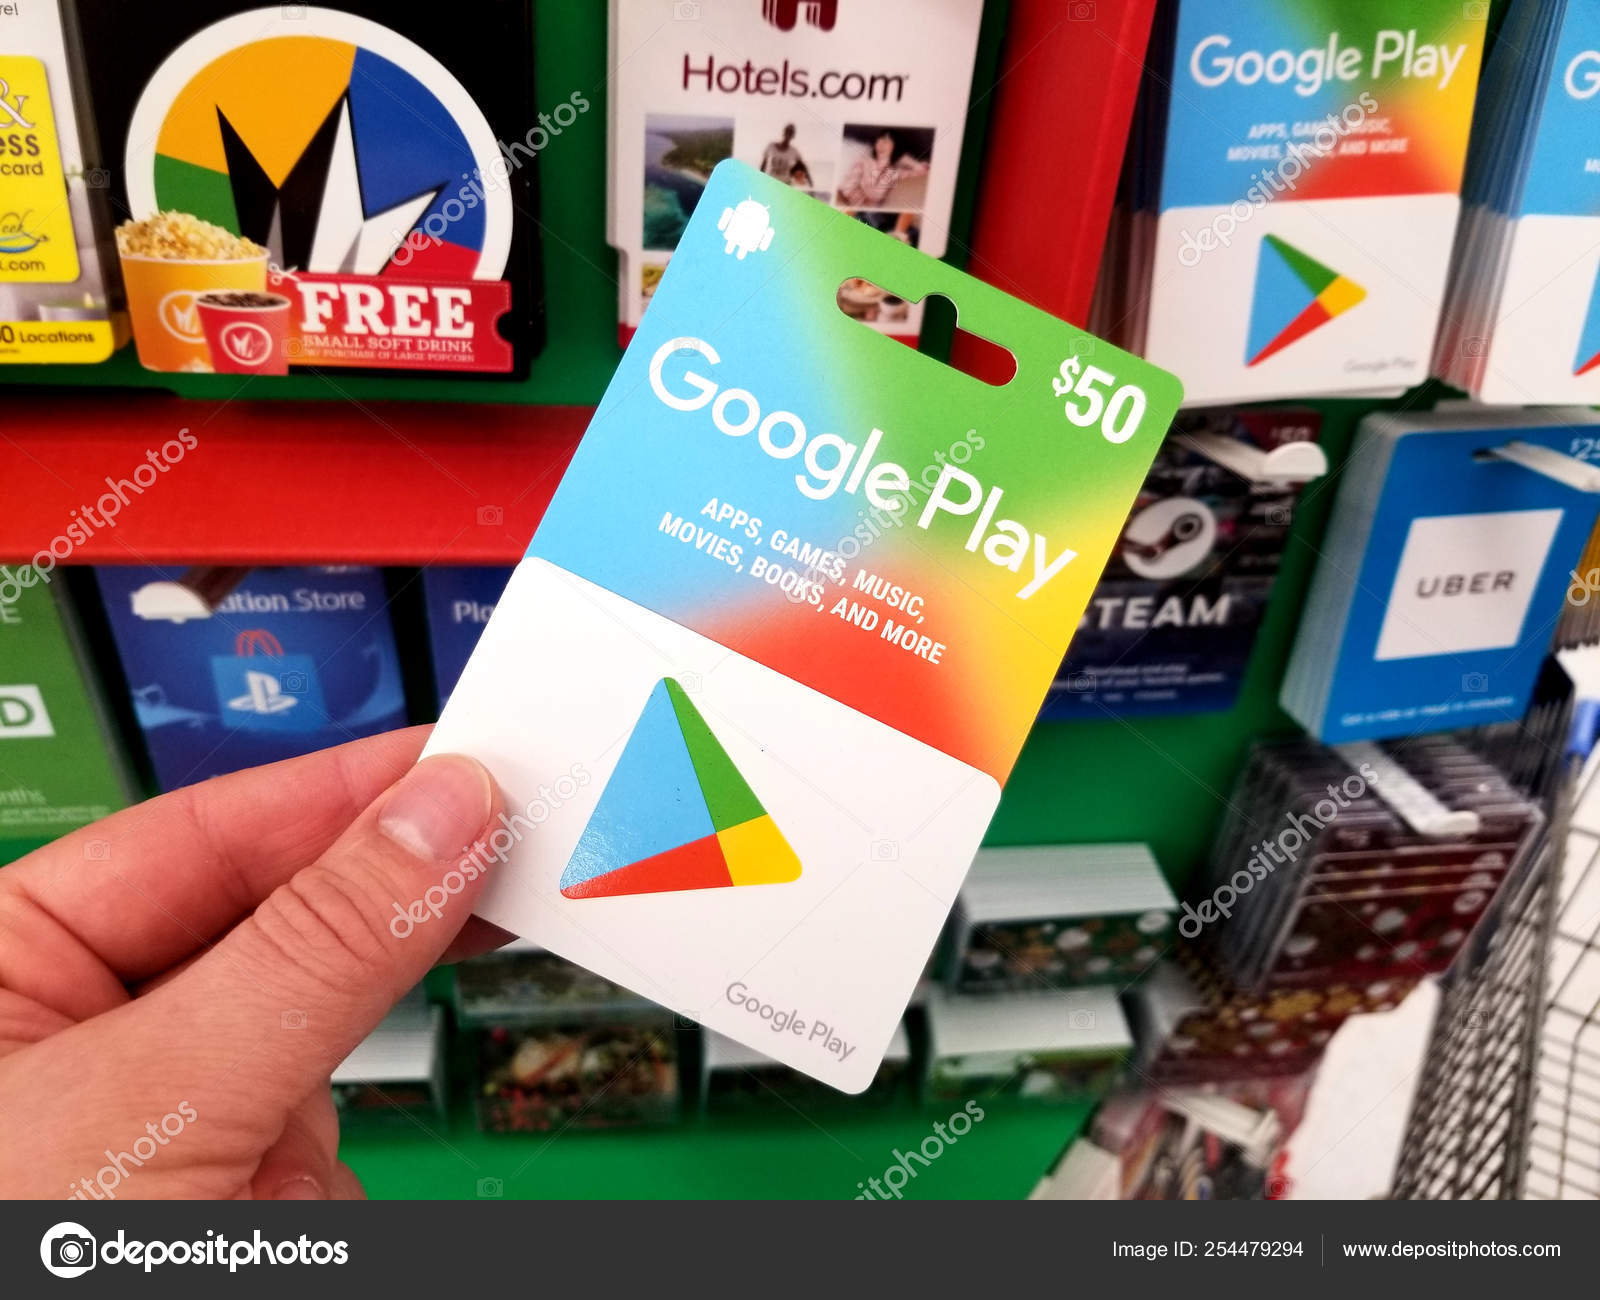 Different Pictures Of Google Play Gift Cards And How To Identify Them - Nosh